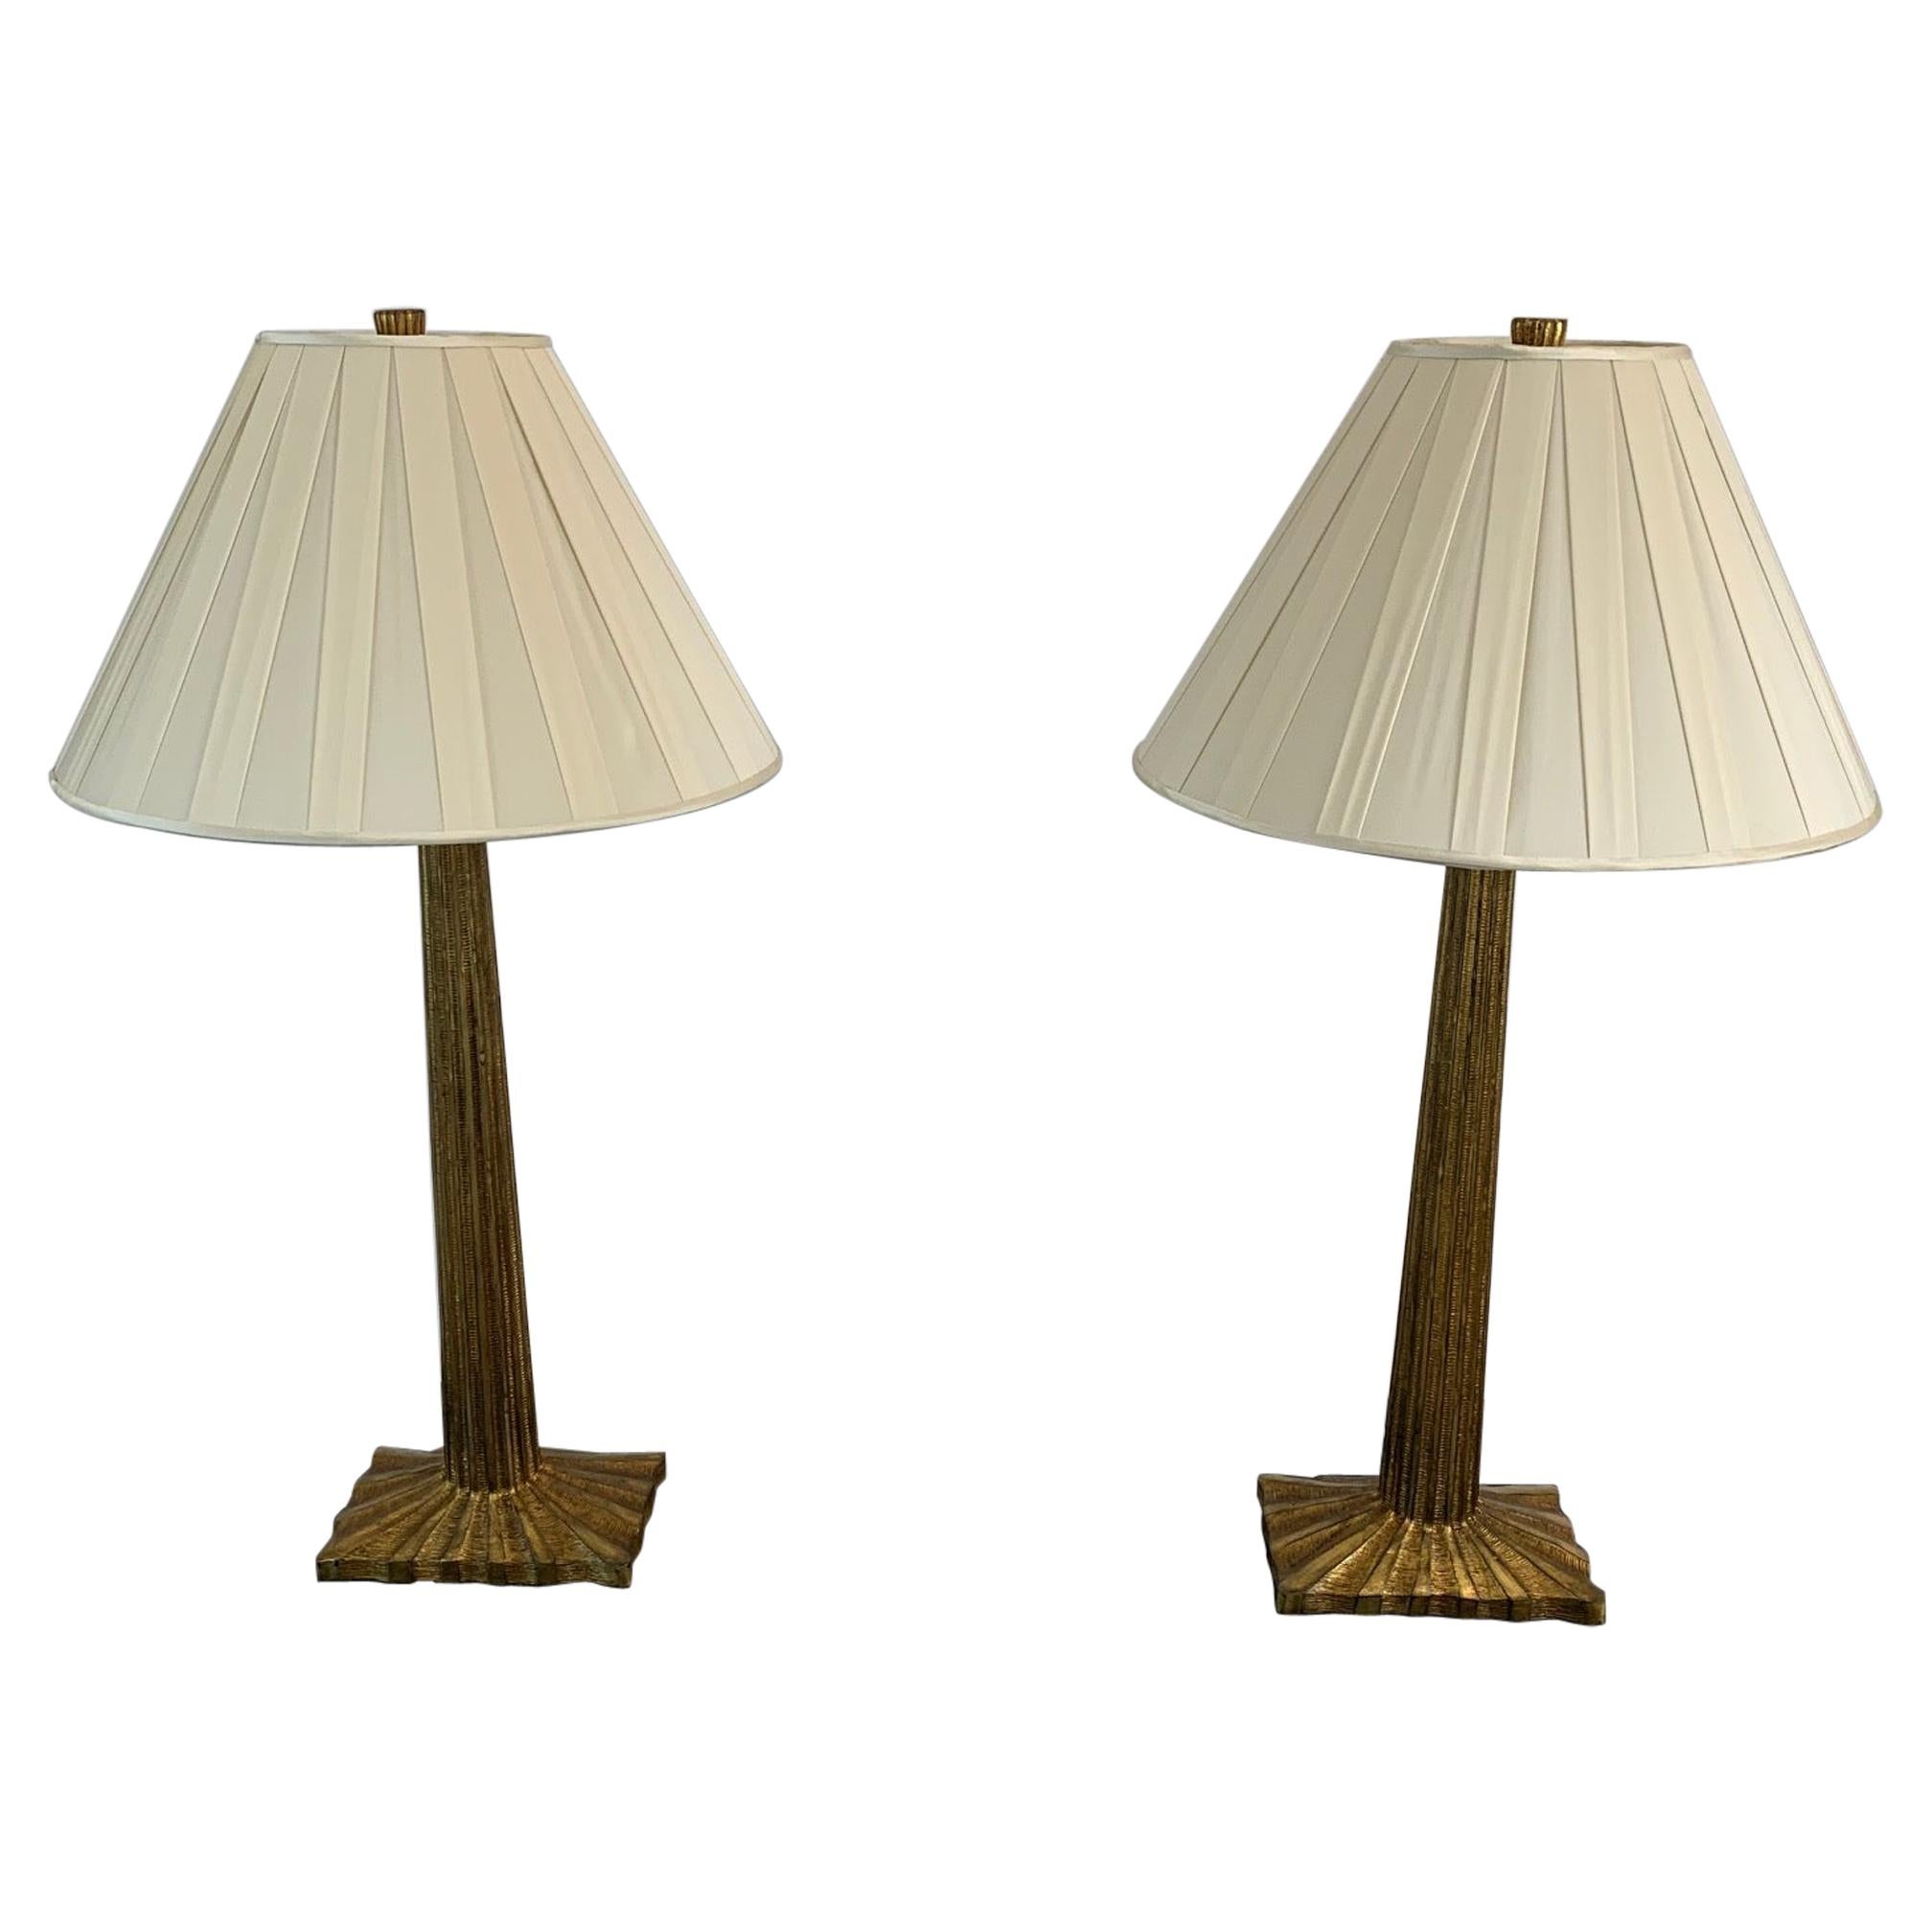 Great Looking Pair of Brushed Brass Table Lamps by Visual Comfort